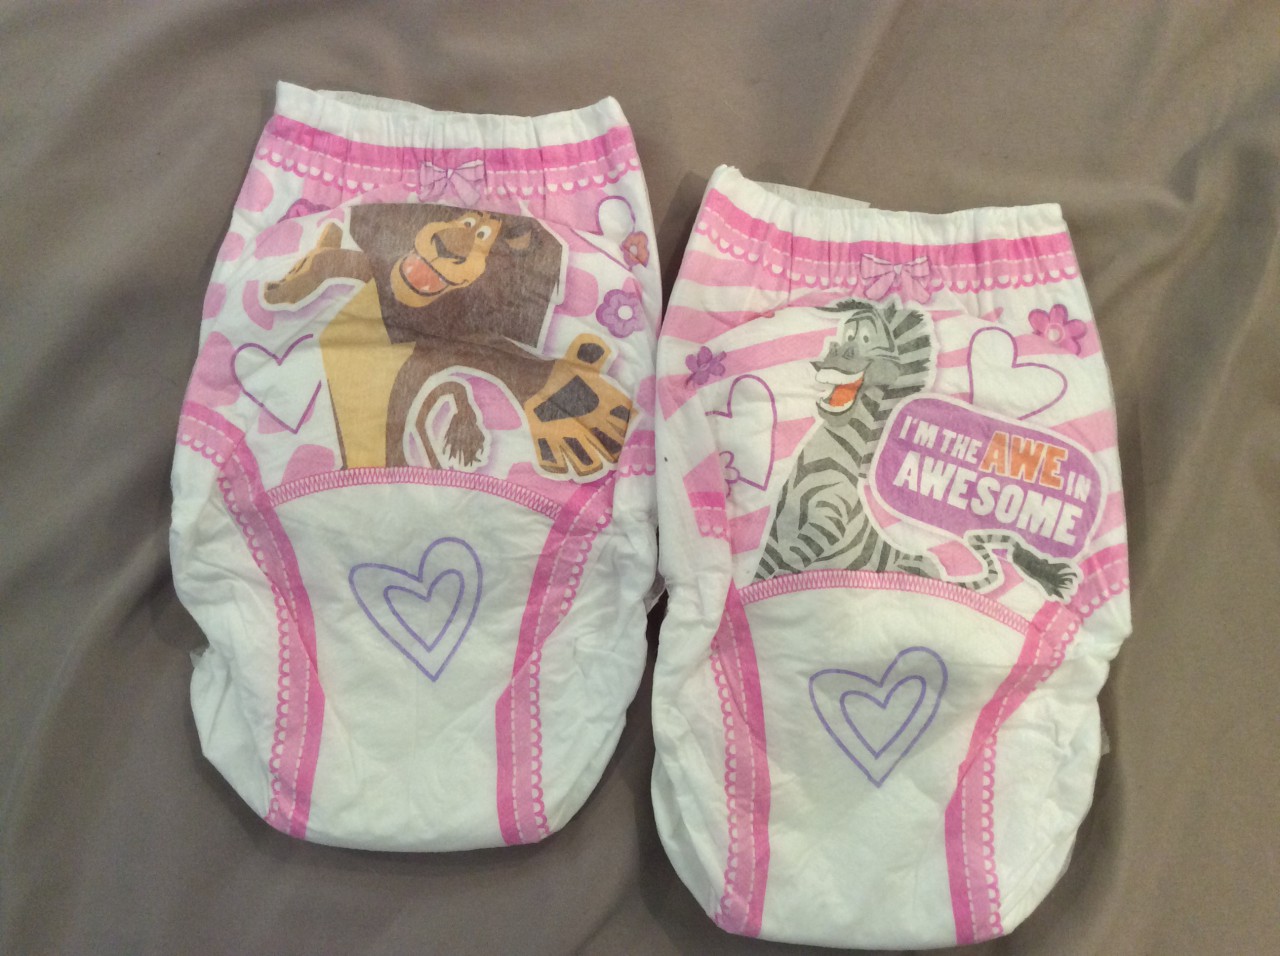 PAW Patrol training pants references (Girls), 2.0 by